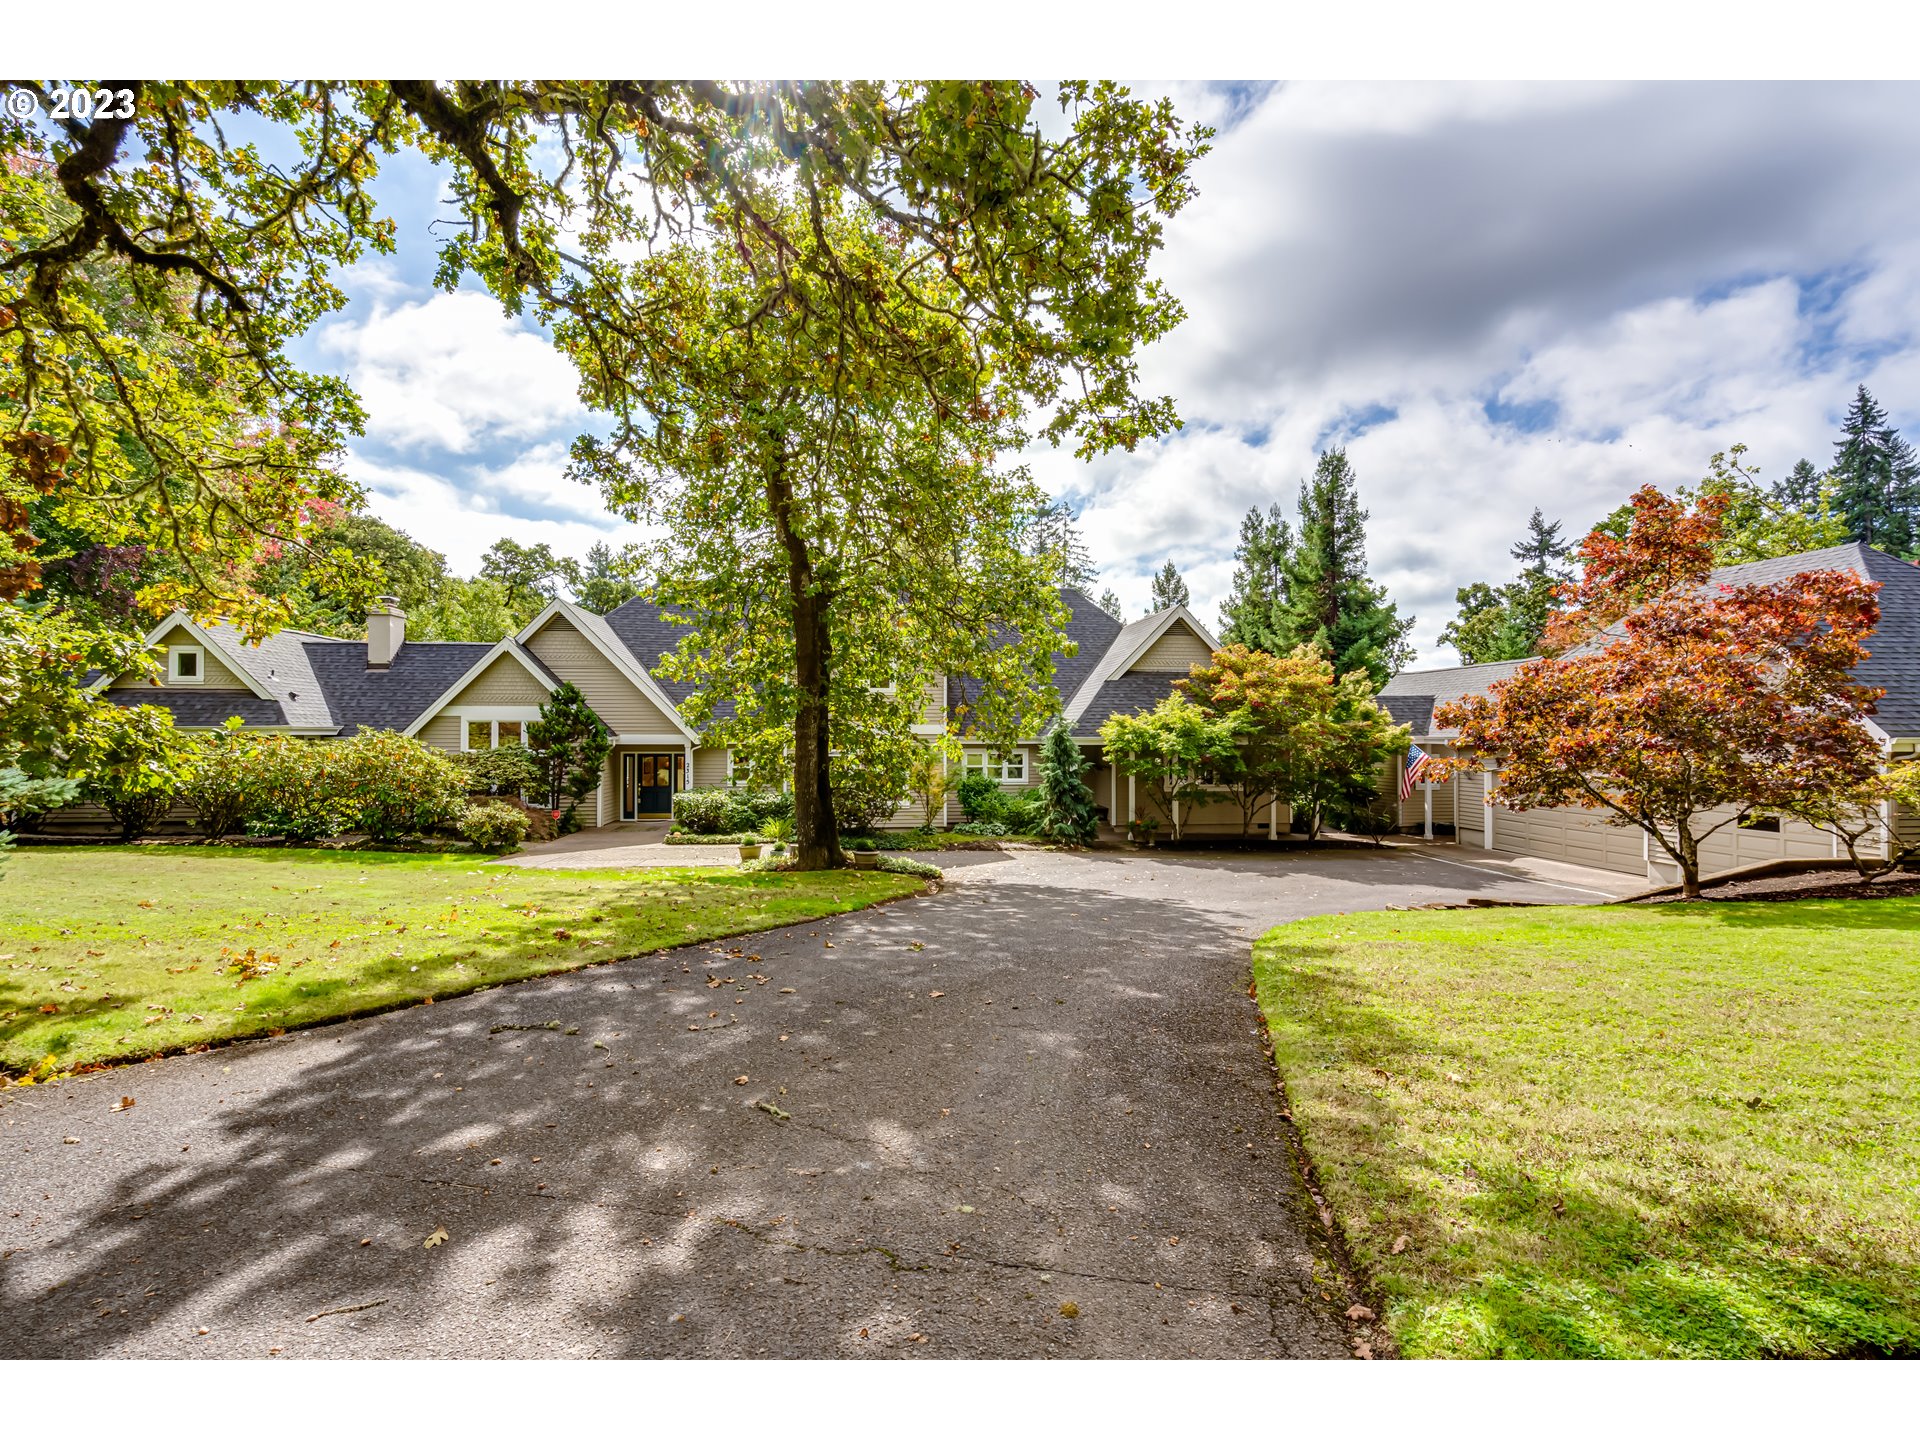 To describe this home without superlatives is a tall order. It is not a stretch to say that it is a one-of-a-kind. Storms Court is a private community of 5 stately homes (7 lots) on a cul-de-sac, thoughtfully developed in the early 1990s. It is located on the shoulder of a knoll, offering remarkably flat land given it?s in the southwest hills. This home is on a double lot and was reimagined by architect Rob Thallon in 2003. Special care was taken to connect the house to the outside and to invite the residents and guests to enjoy the beauty that surrounds them. The deck is south-facing and looks out on an expansive yard. To ensure year-round enjoyment, a portion was covered with a gable roof. This makes a fabulous outdoor dining and recreating area and features an outdoor fireplace. The peace and privacy in a centrally located home is a rare combination. The house was designed to accommodate multigenerational living and includes a lovely accessory dwelling unit, replete with its own bedroom, bathroom and sitting room. The main home manages to be cozy and expansive at the same time thanks to thoughtful layout and the inclusion of features like the inglenook. Custom cabinetry and built-in furniture exude style and class. The owner?s suite opens out to a private patio with a built-in hot tub. The kitchen is laid out for those who love to cook and to host, with ample storage and counter space. The cooking island has a gas, downdraft cooktop. The Sub-Zero fridge is less than a year old. The roof was replaced within the last 3 years and the exterior paint was redone in the last 5. The home has been meticulously cared for and loved and awaits its third owner with open arms.